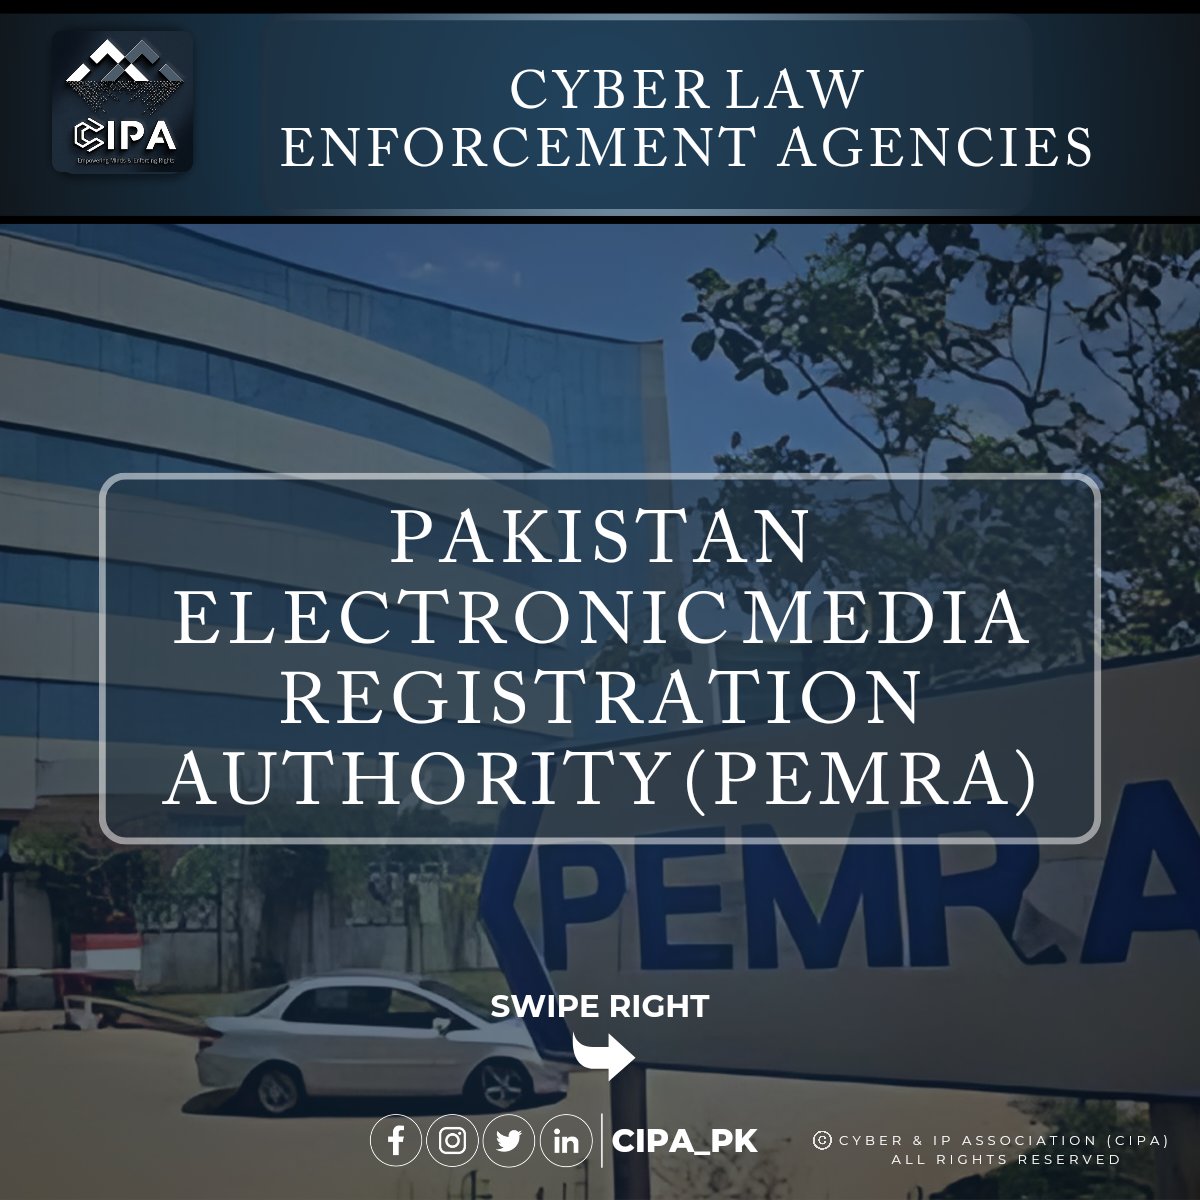 PEMRA: Regulating electronic media in Pakistan, ensuring compliance with cyber laws for a safer digital landscape.

#Cipa_pk #dataprotection #digitalrights #intellectualpropertyrights #cyber #PEMRA